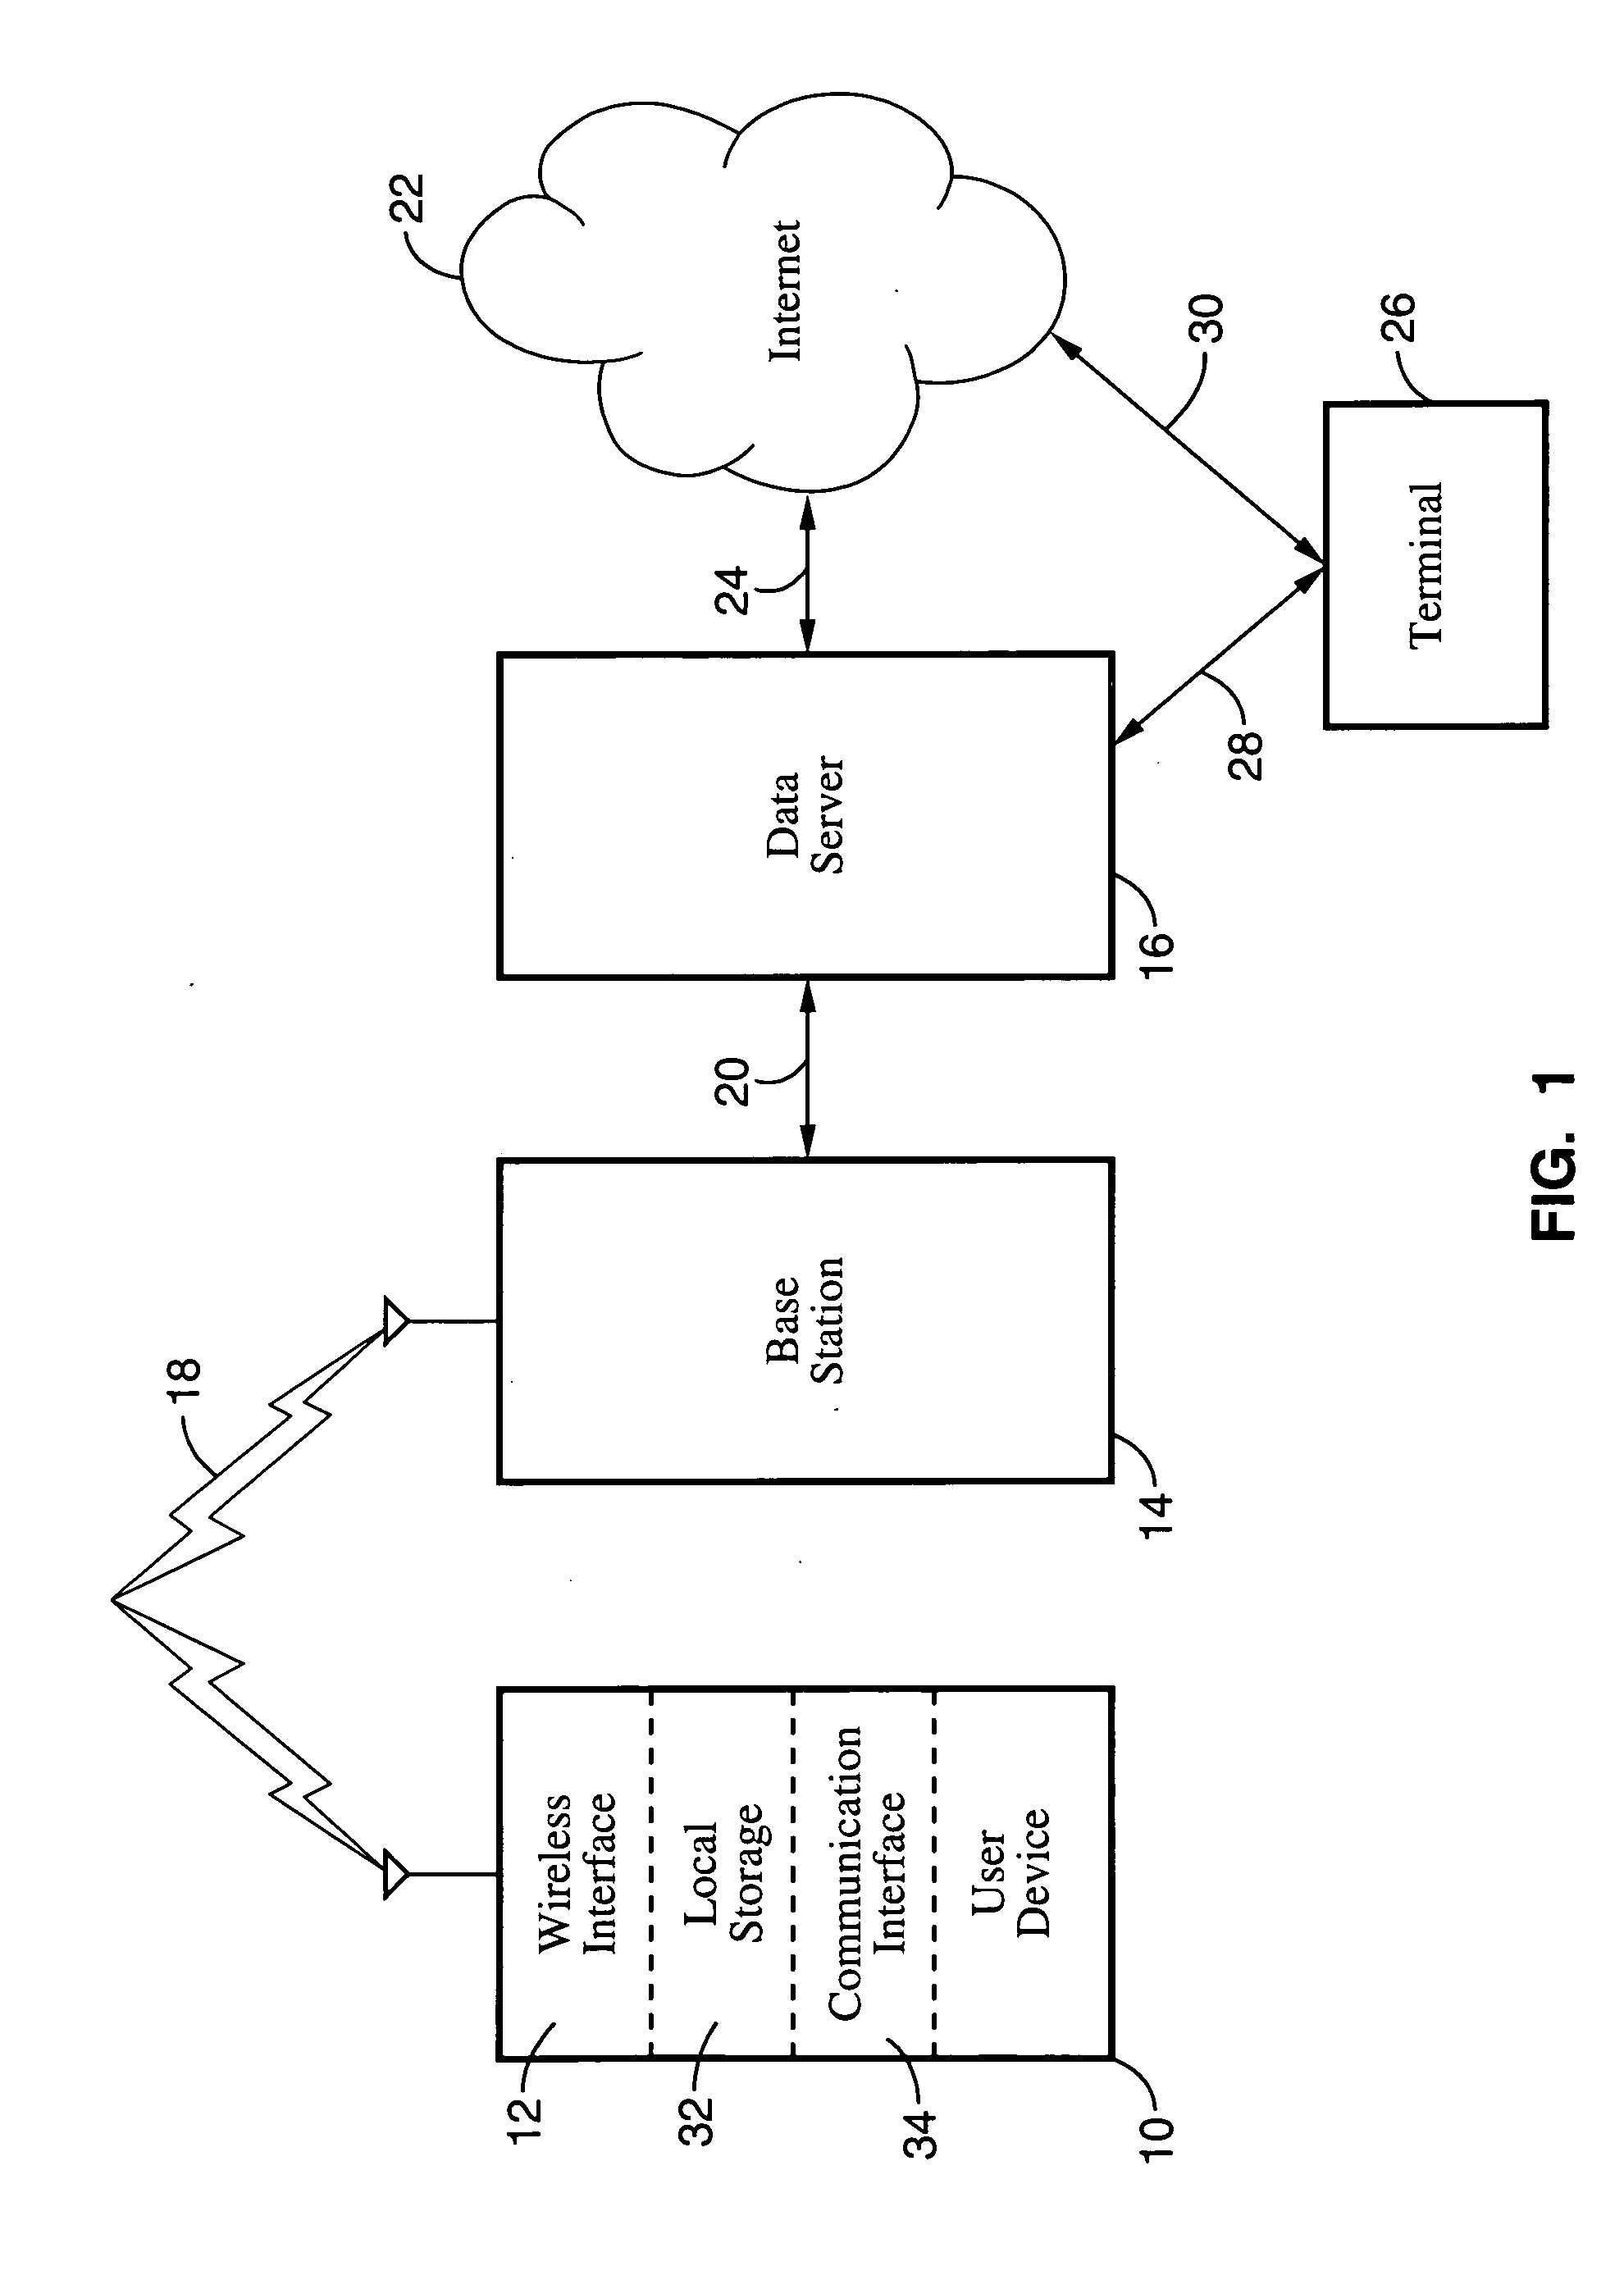 Method, system and devices for wireless data storage on a server and data retrieval